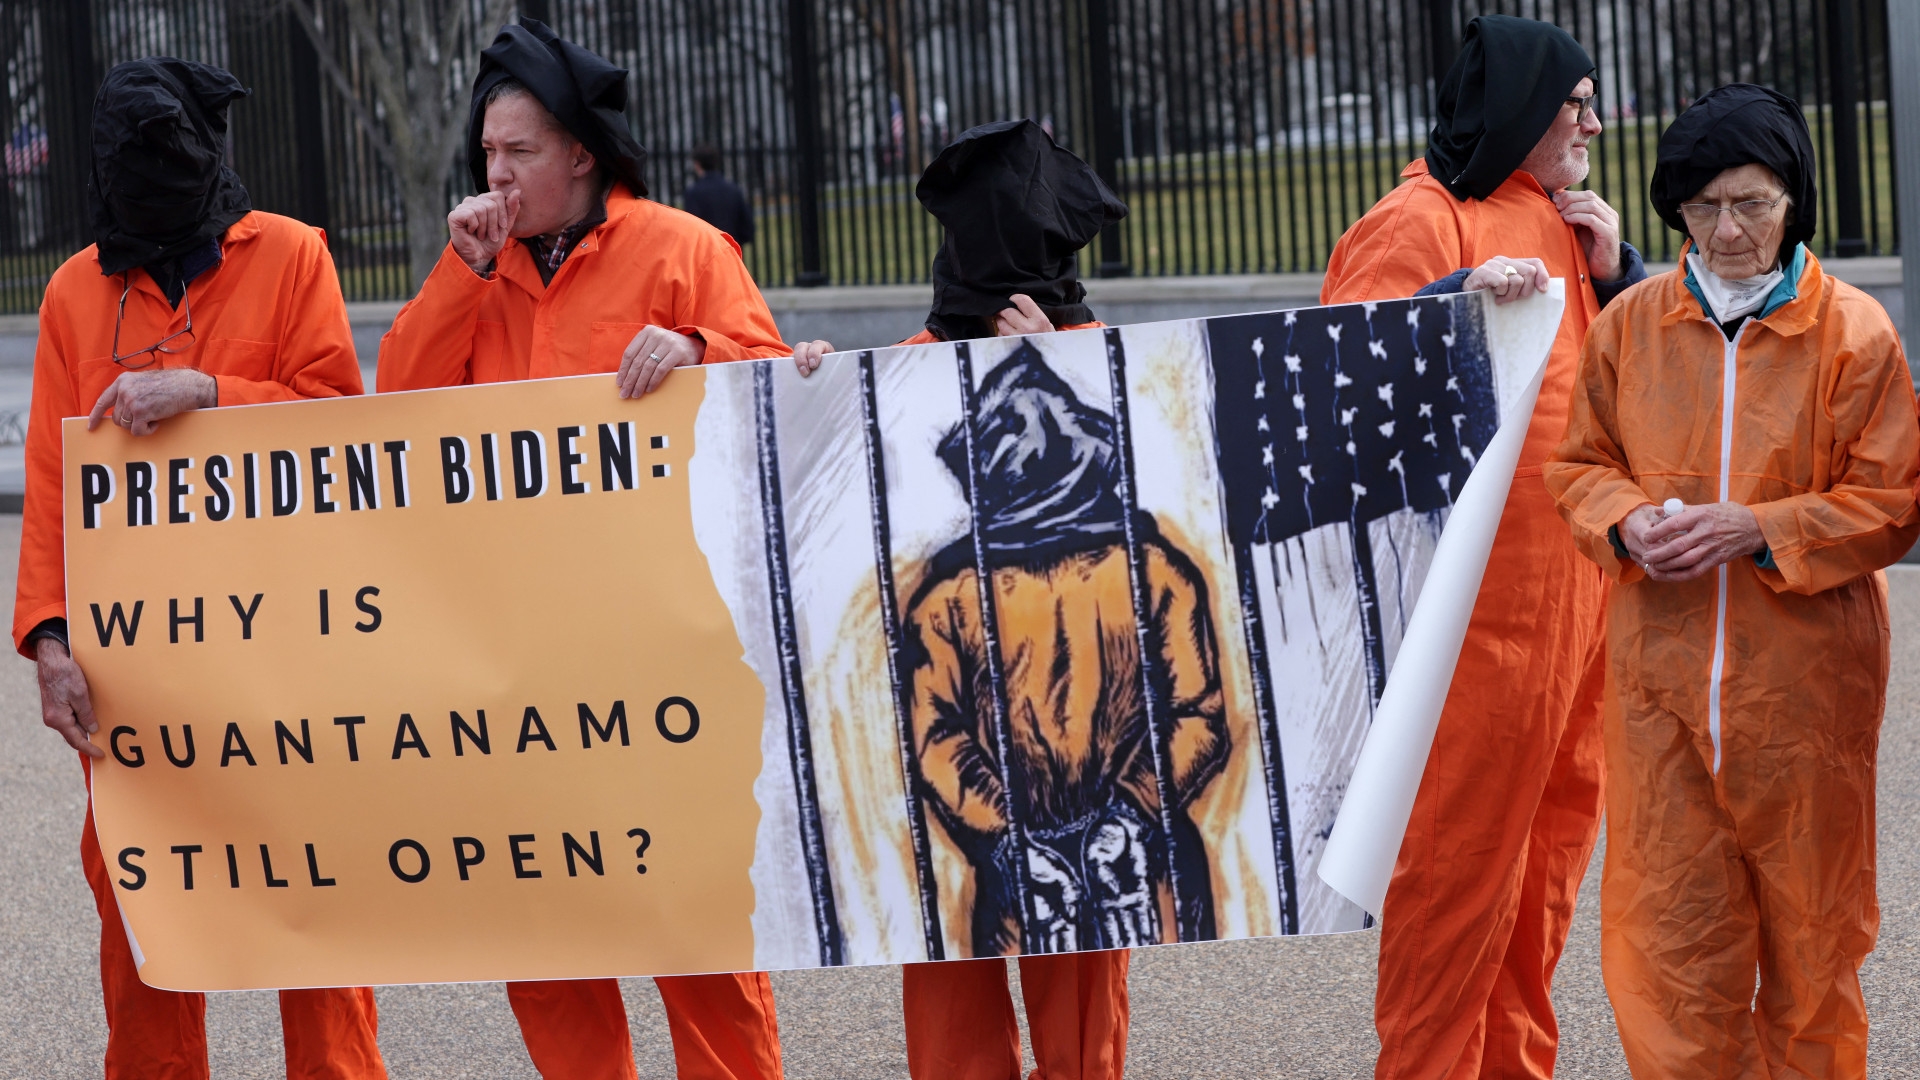 Activists in orange jumpsuits, representing the remaining detainees held in Guantanamo, participate in a protest in front of the White House, in Washington, DC on 11 January 2023 (AFP) 